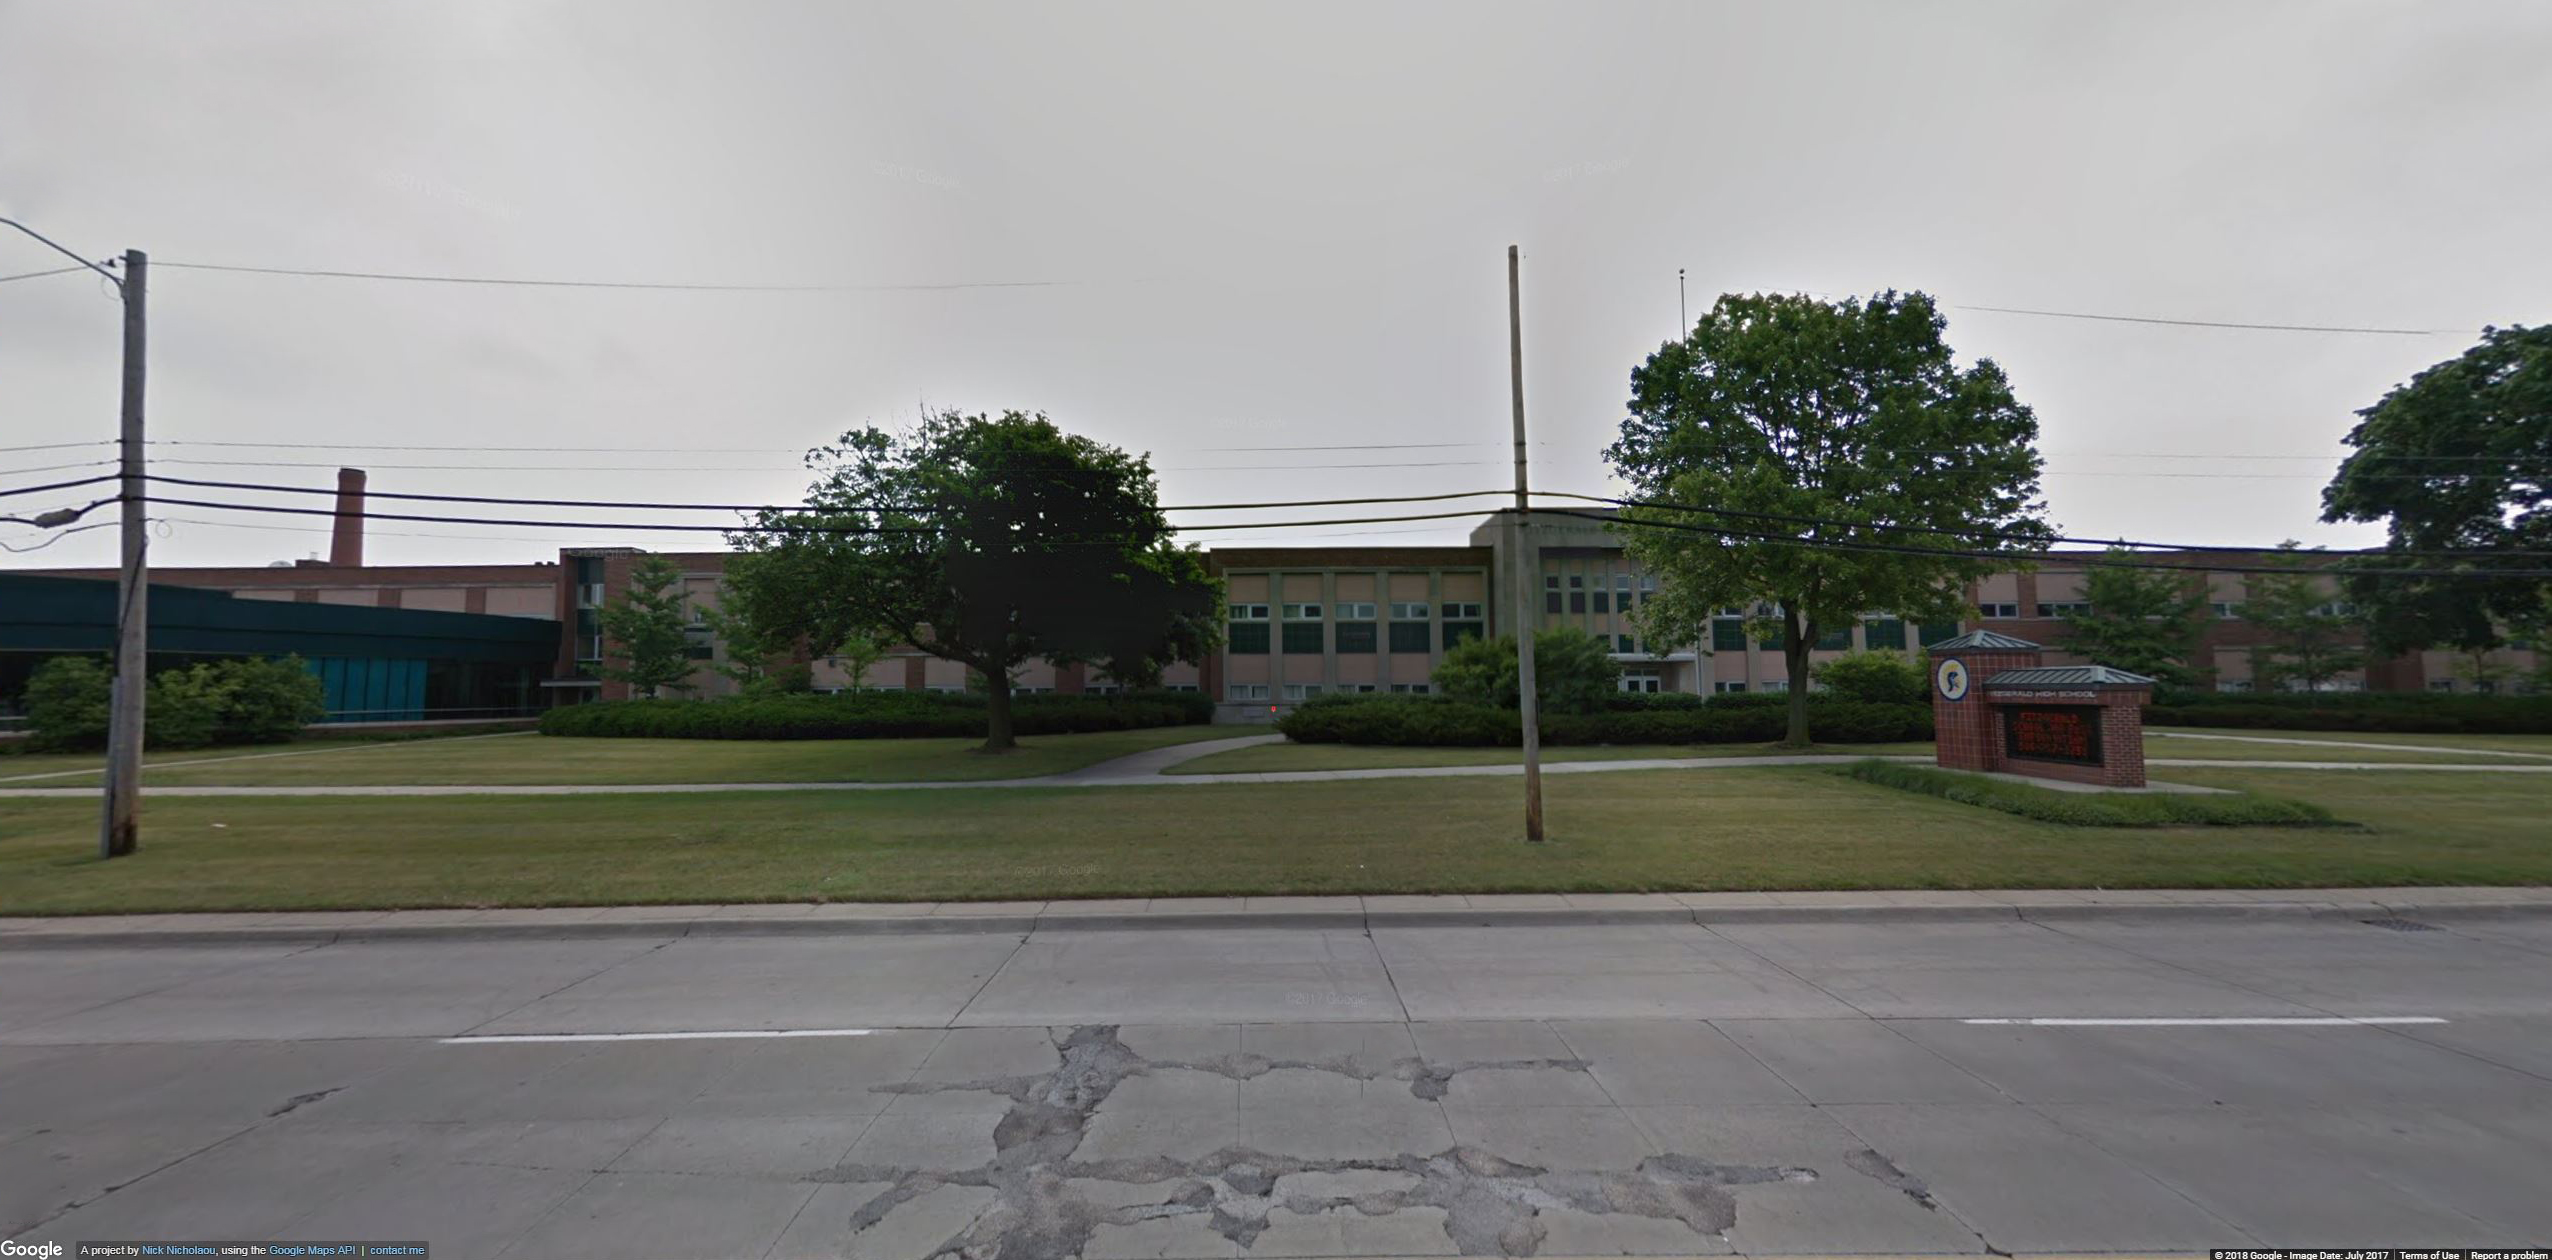 PHOTO: Fitzgerald High School in Warren, Mich., is pictured in this Google Maps image.